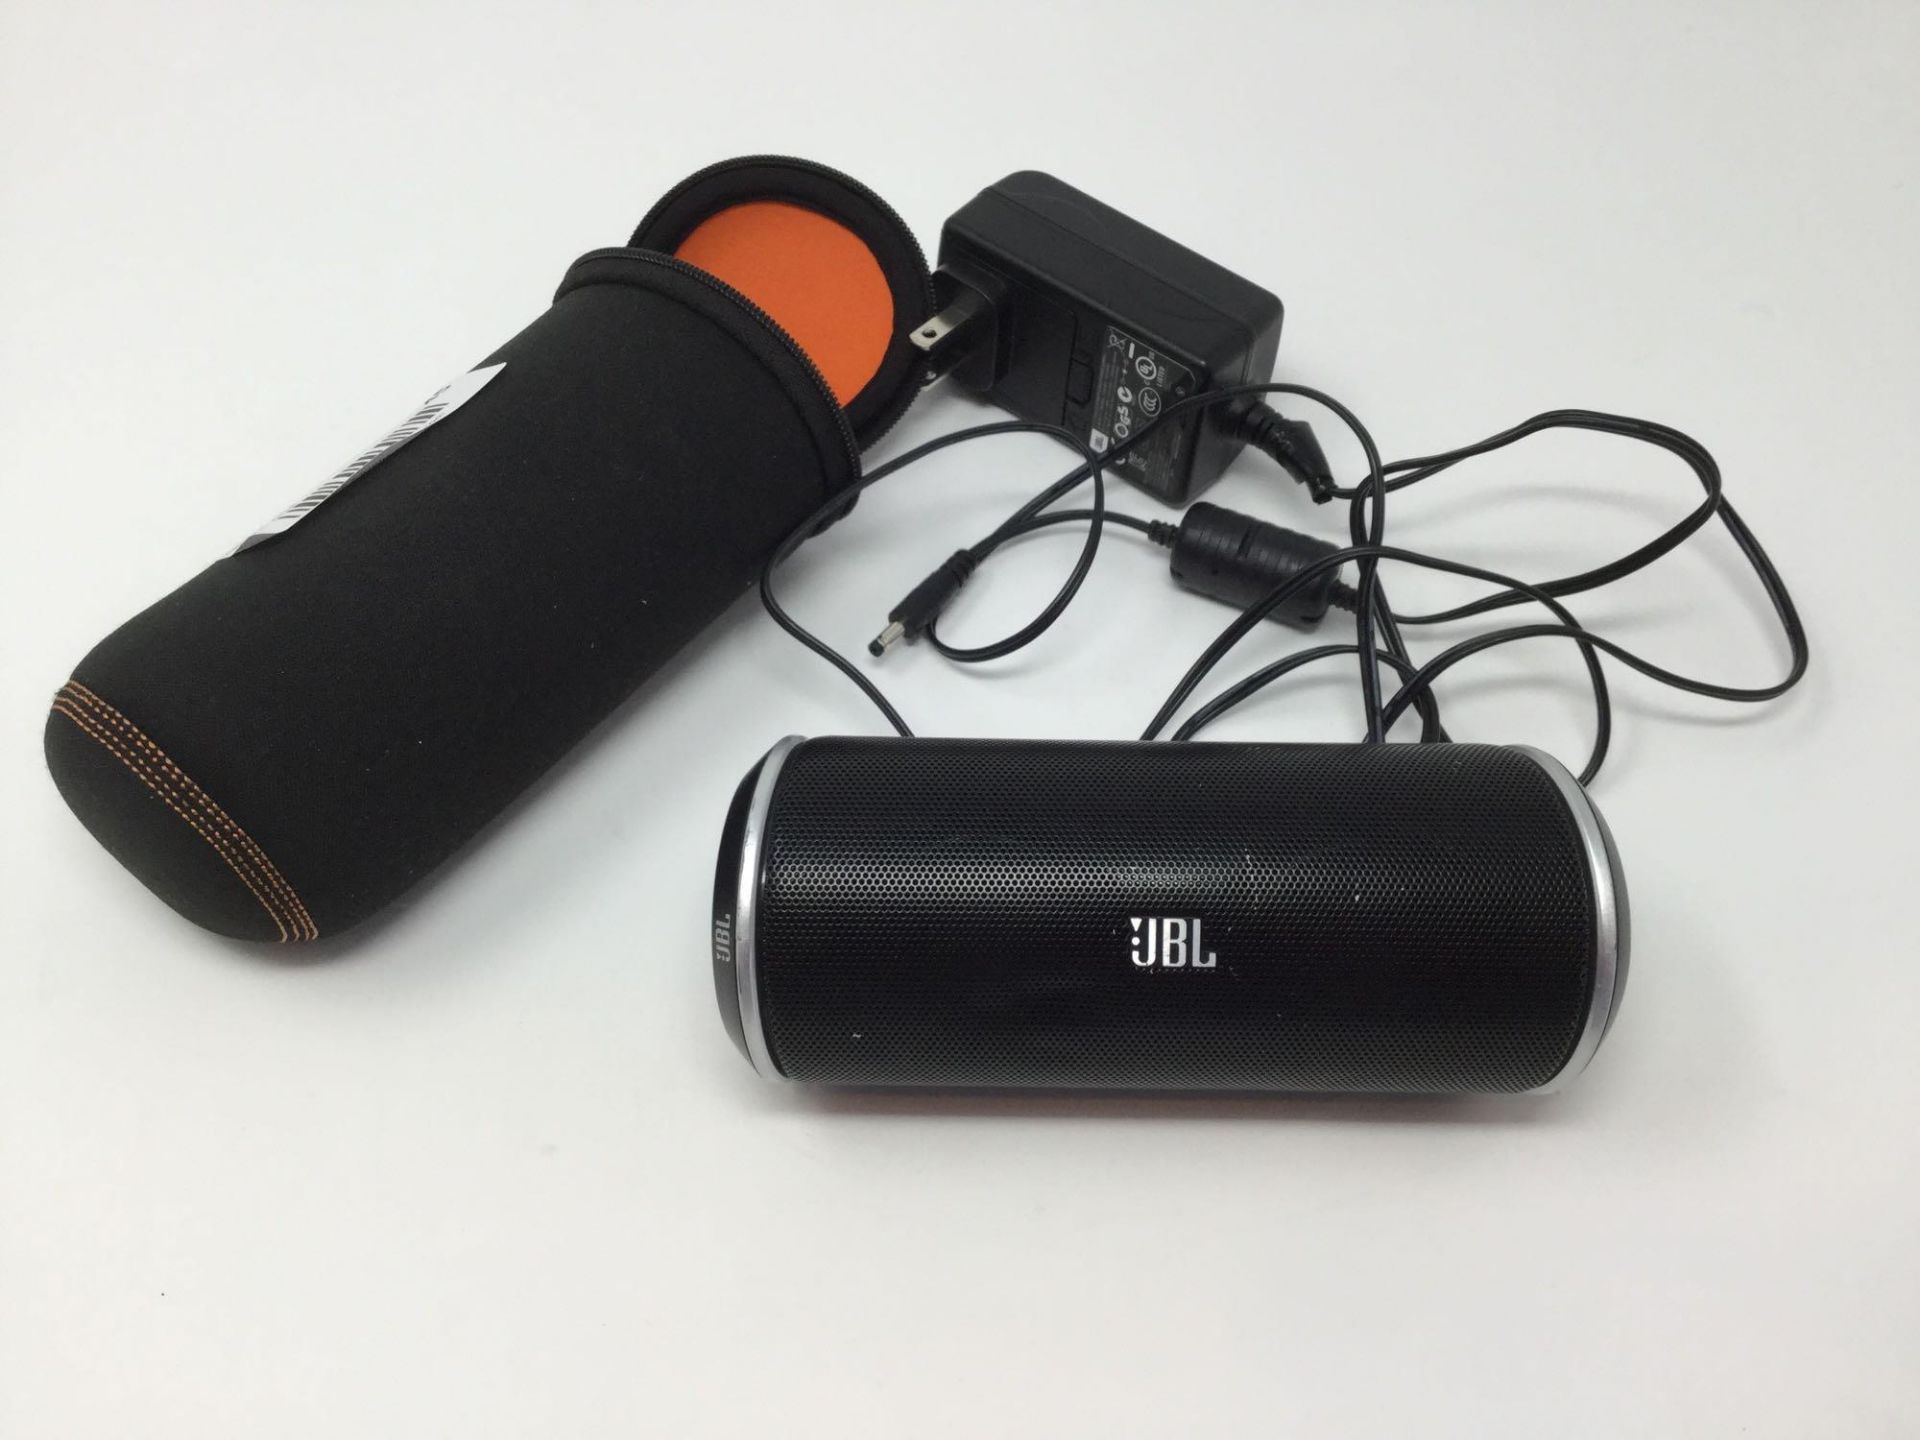 UBL Wireless Bluetooth Speaker with Case and Charging Cord